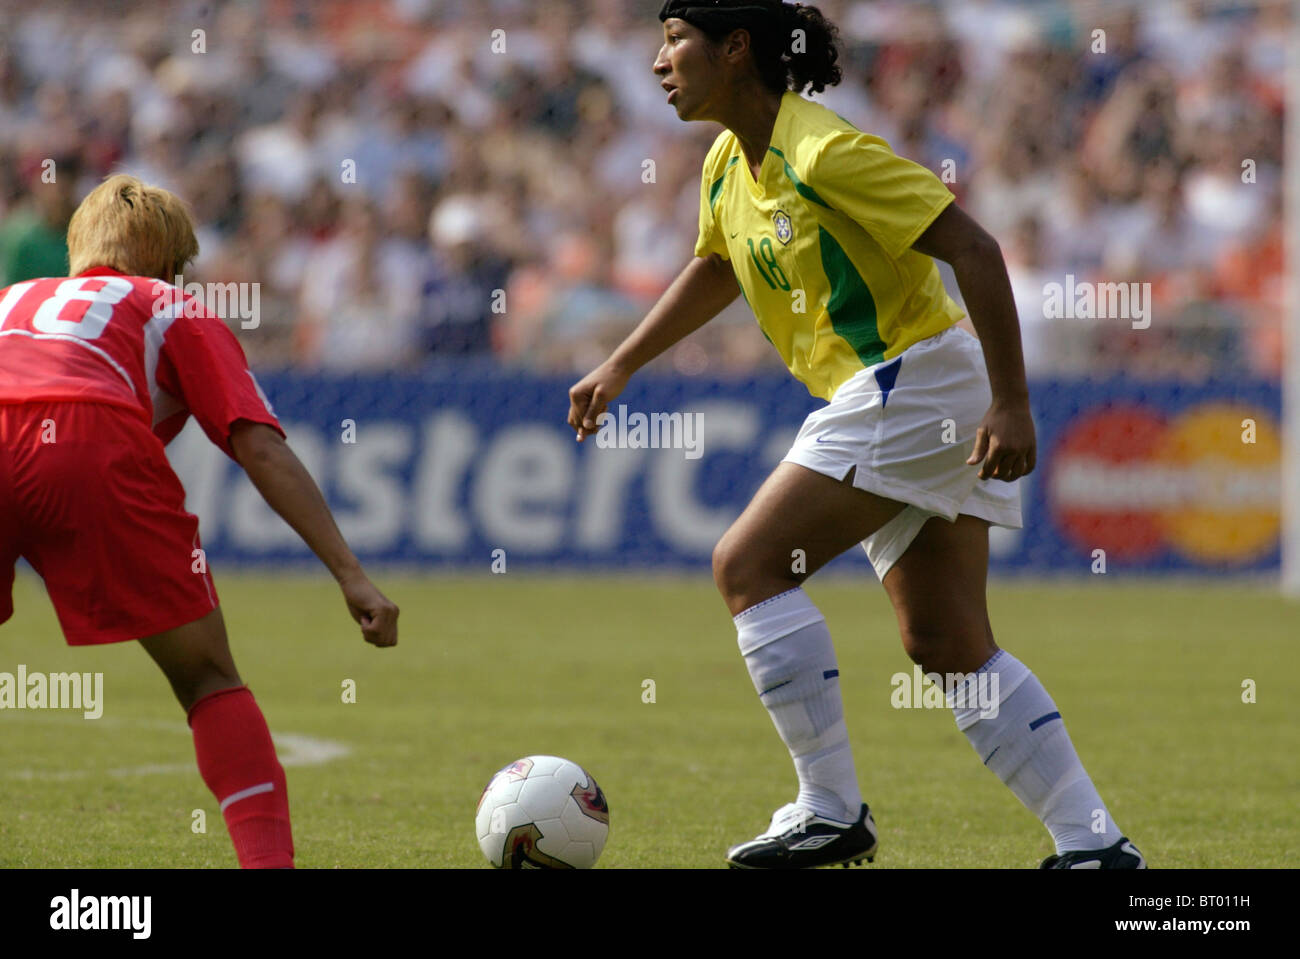 Daniela of Brazil (18) controls the ball against the Korea Republic during a 2003 Women's World Cup soccer match. Stock Photo